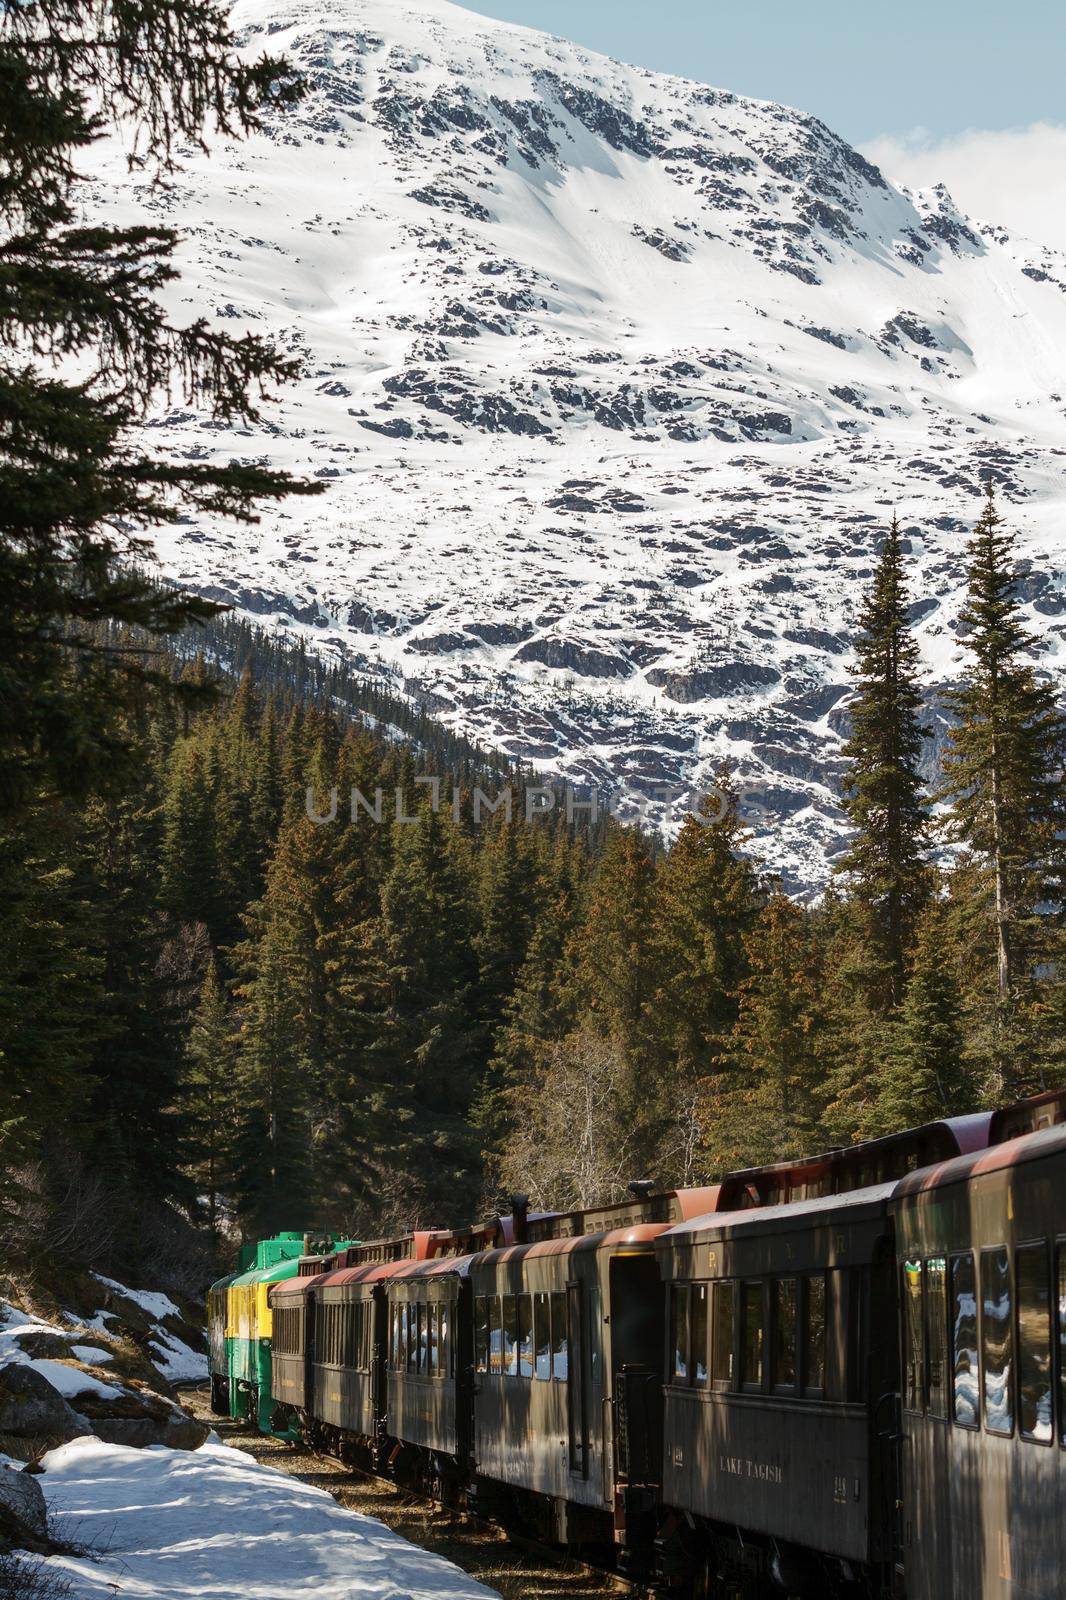 Scenic Railroad on White Pass and Yukon Route in Skagway Alaska by wondry